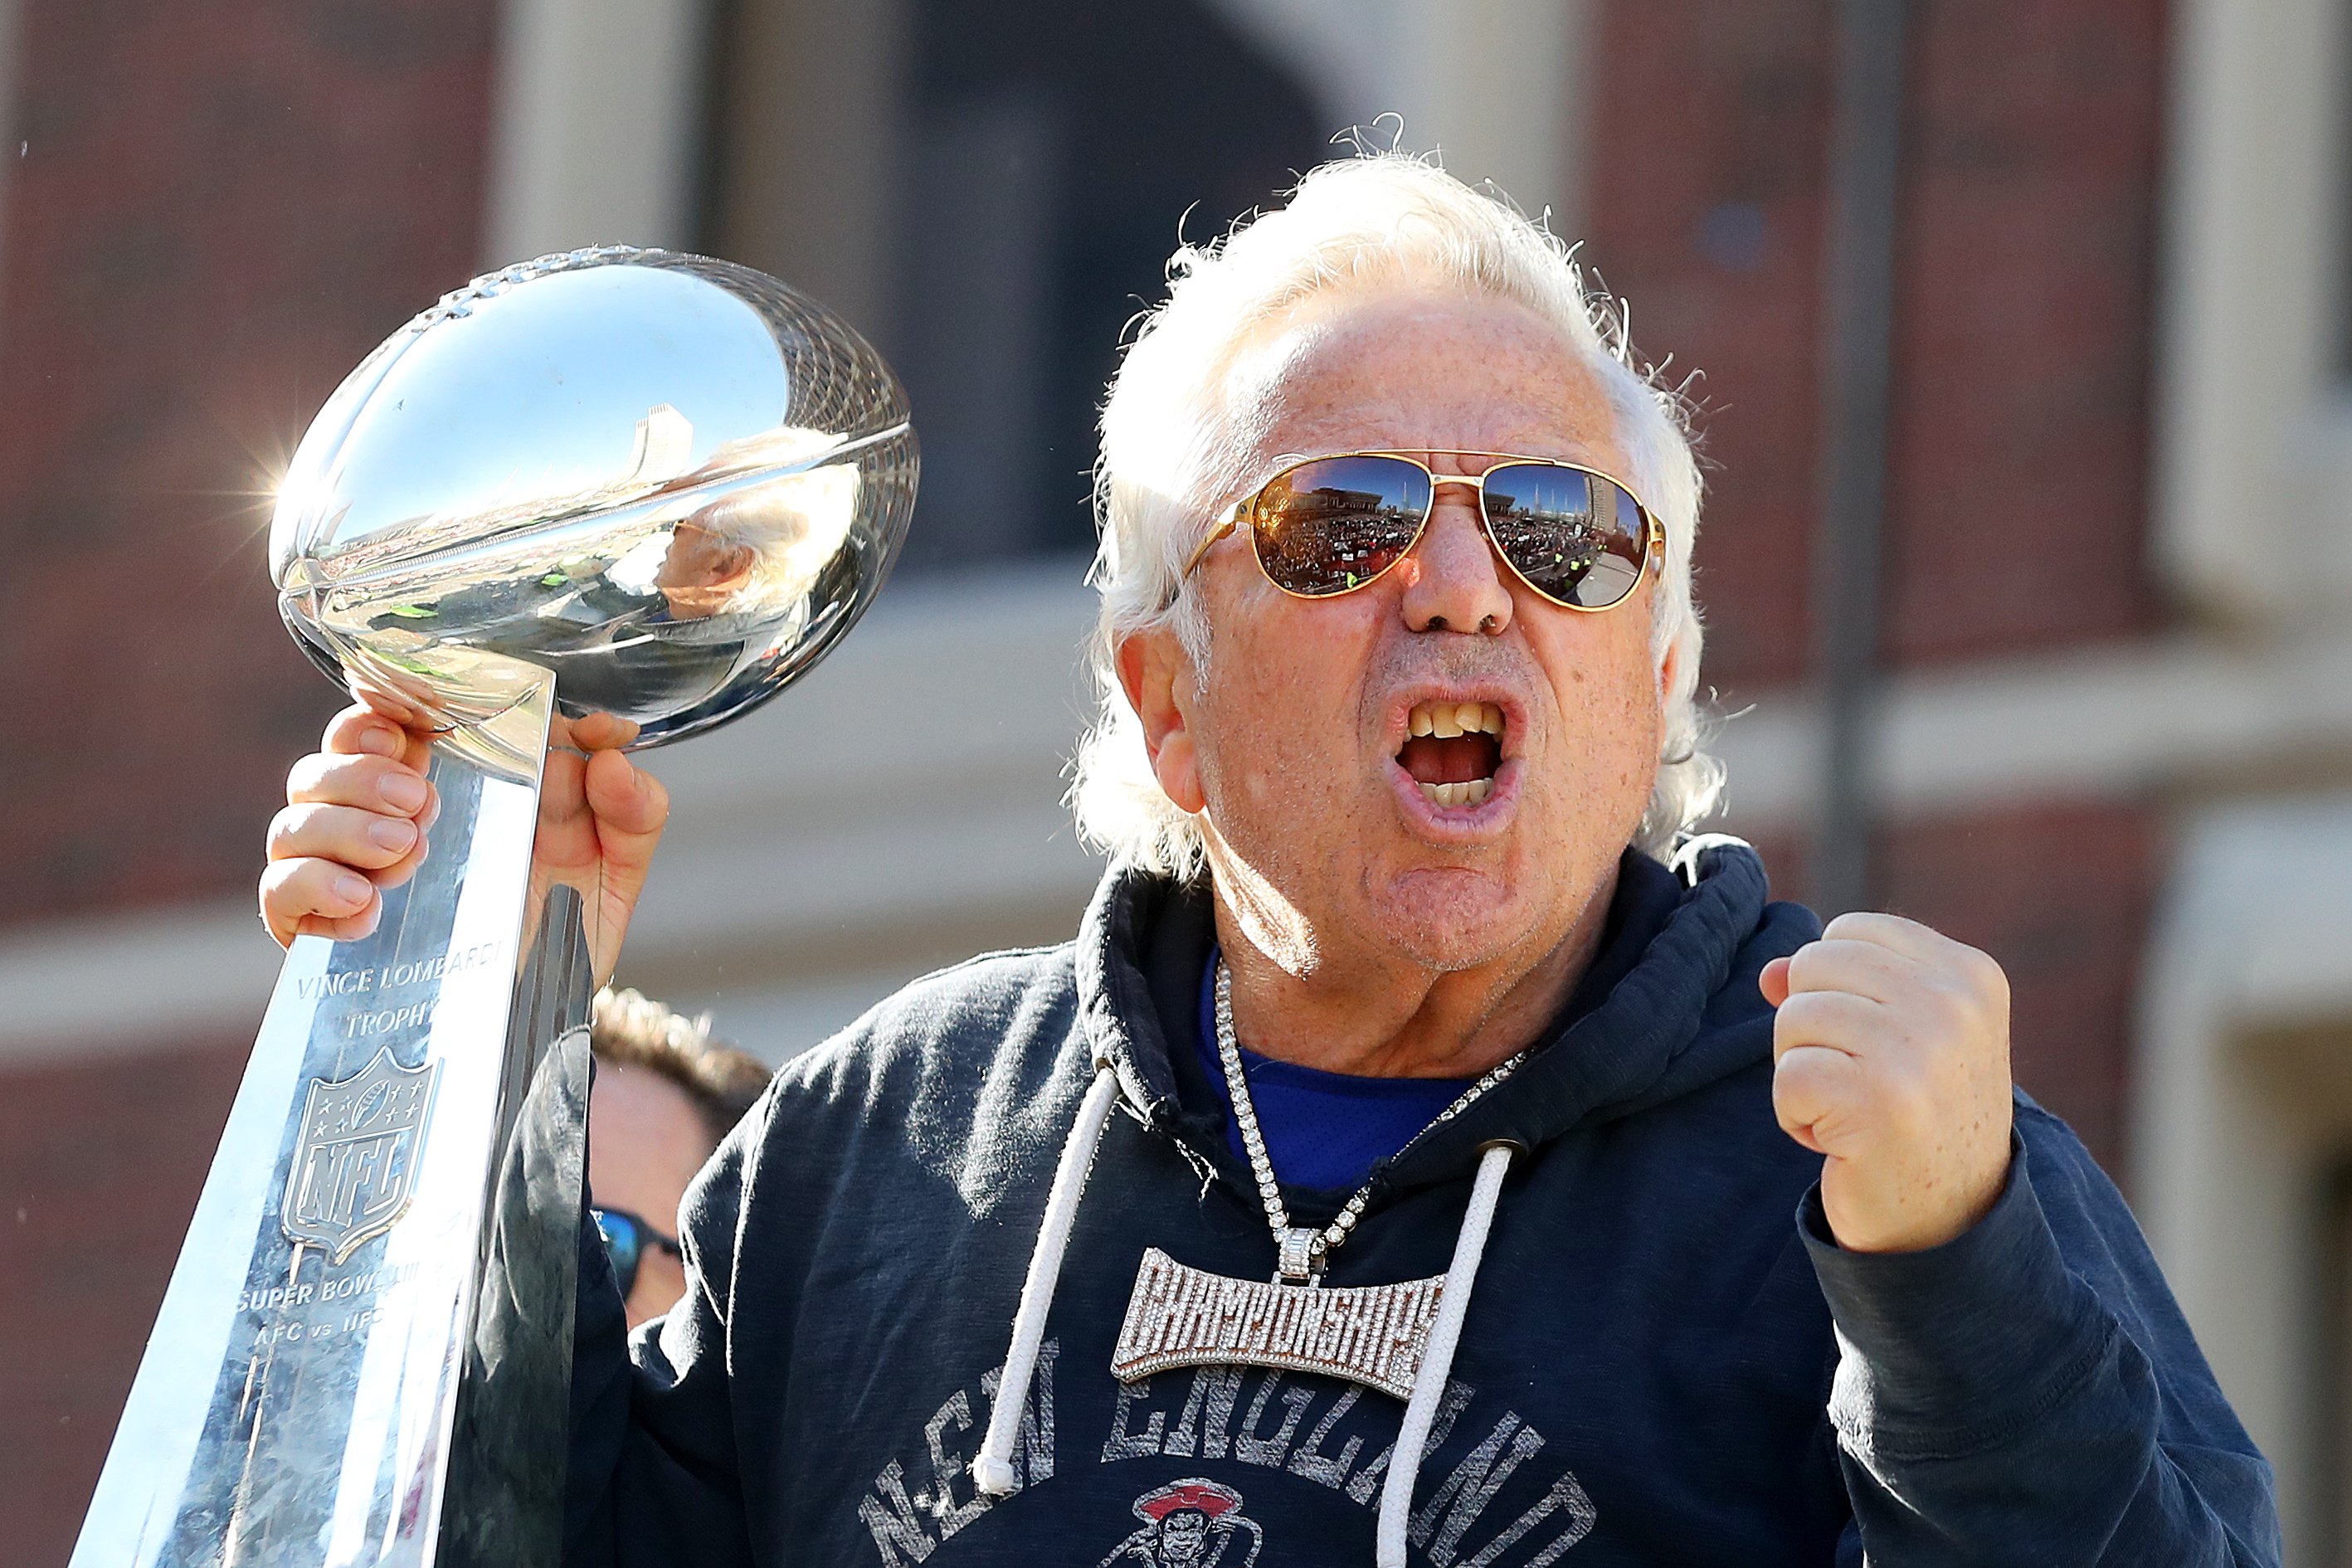 Patriots owner Robert Kraft celebrates on Cambridge street during the New England Patriots Victory Parade on February 05, 2019 in Boston, Massachusetts. (Photo by Maddie Meyer/Getty Images)